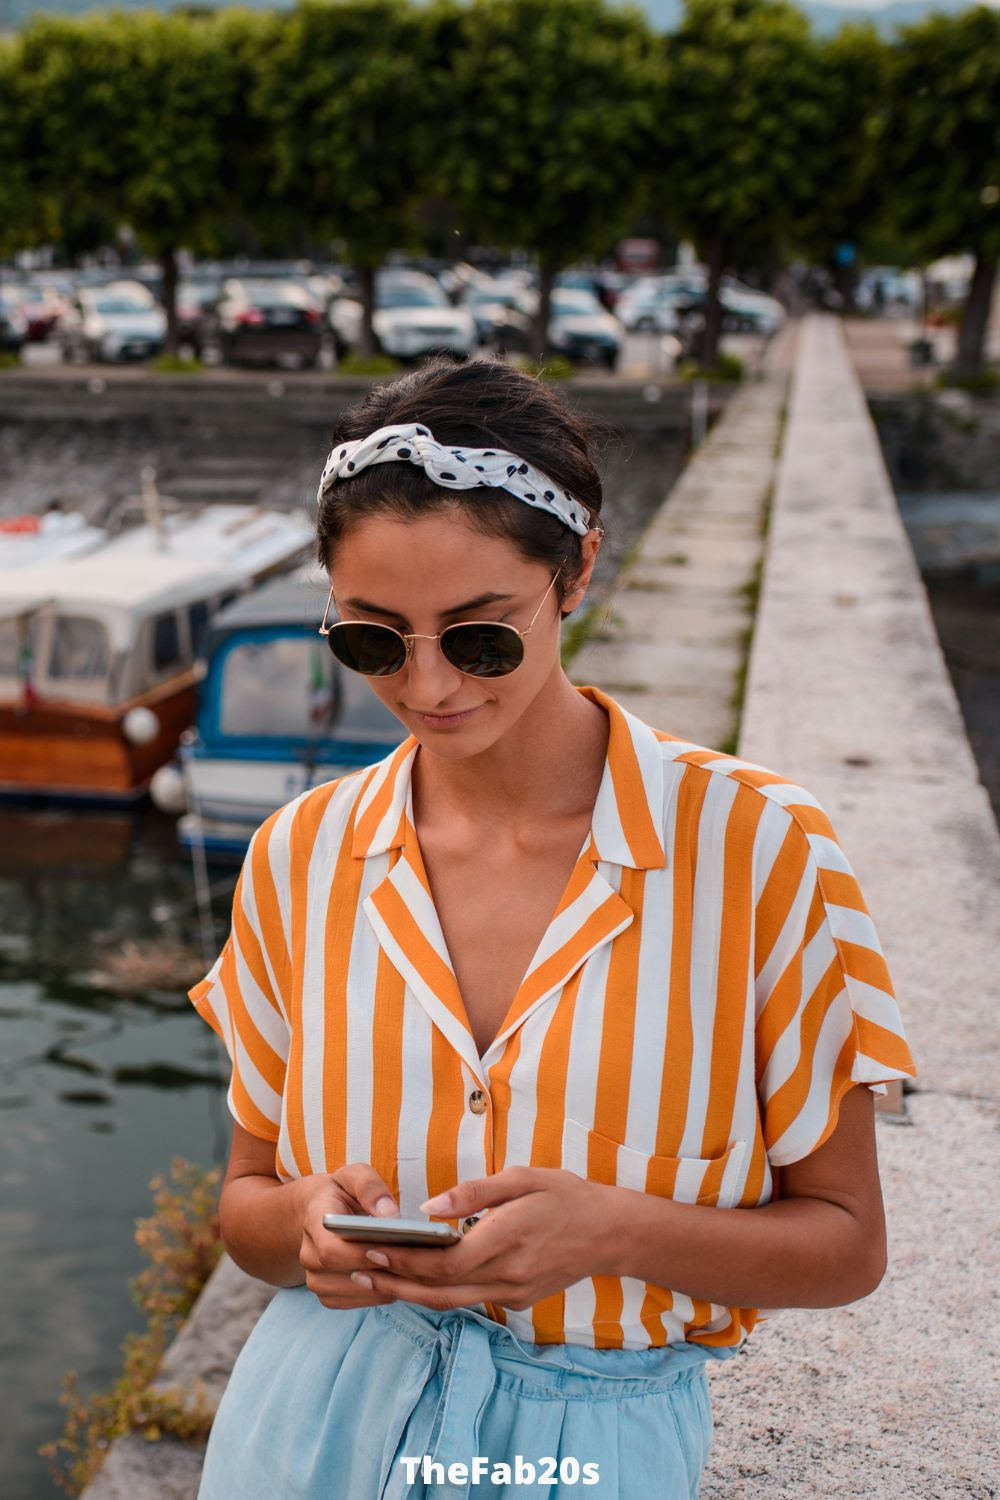 Woman in pretty yellow top textng near boats. 